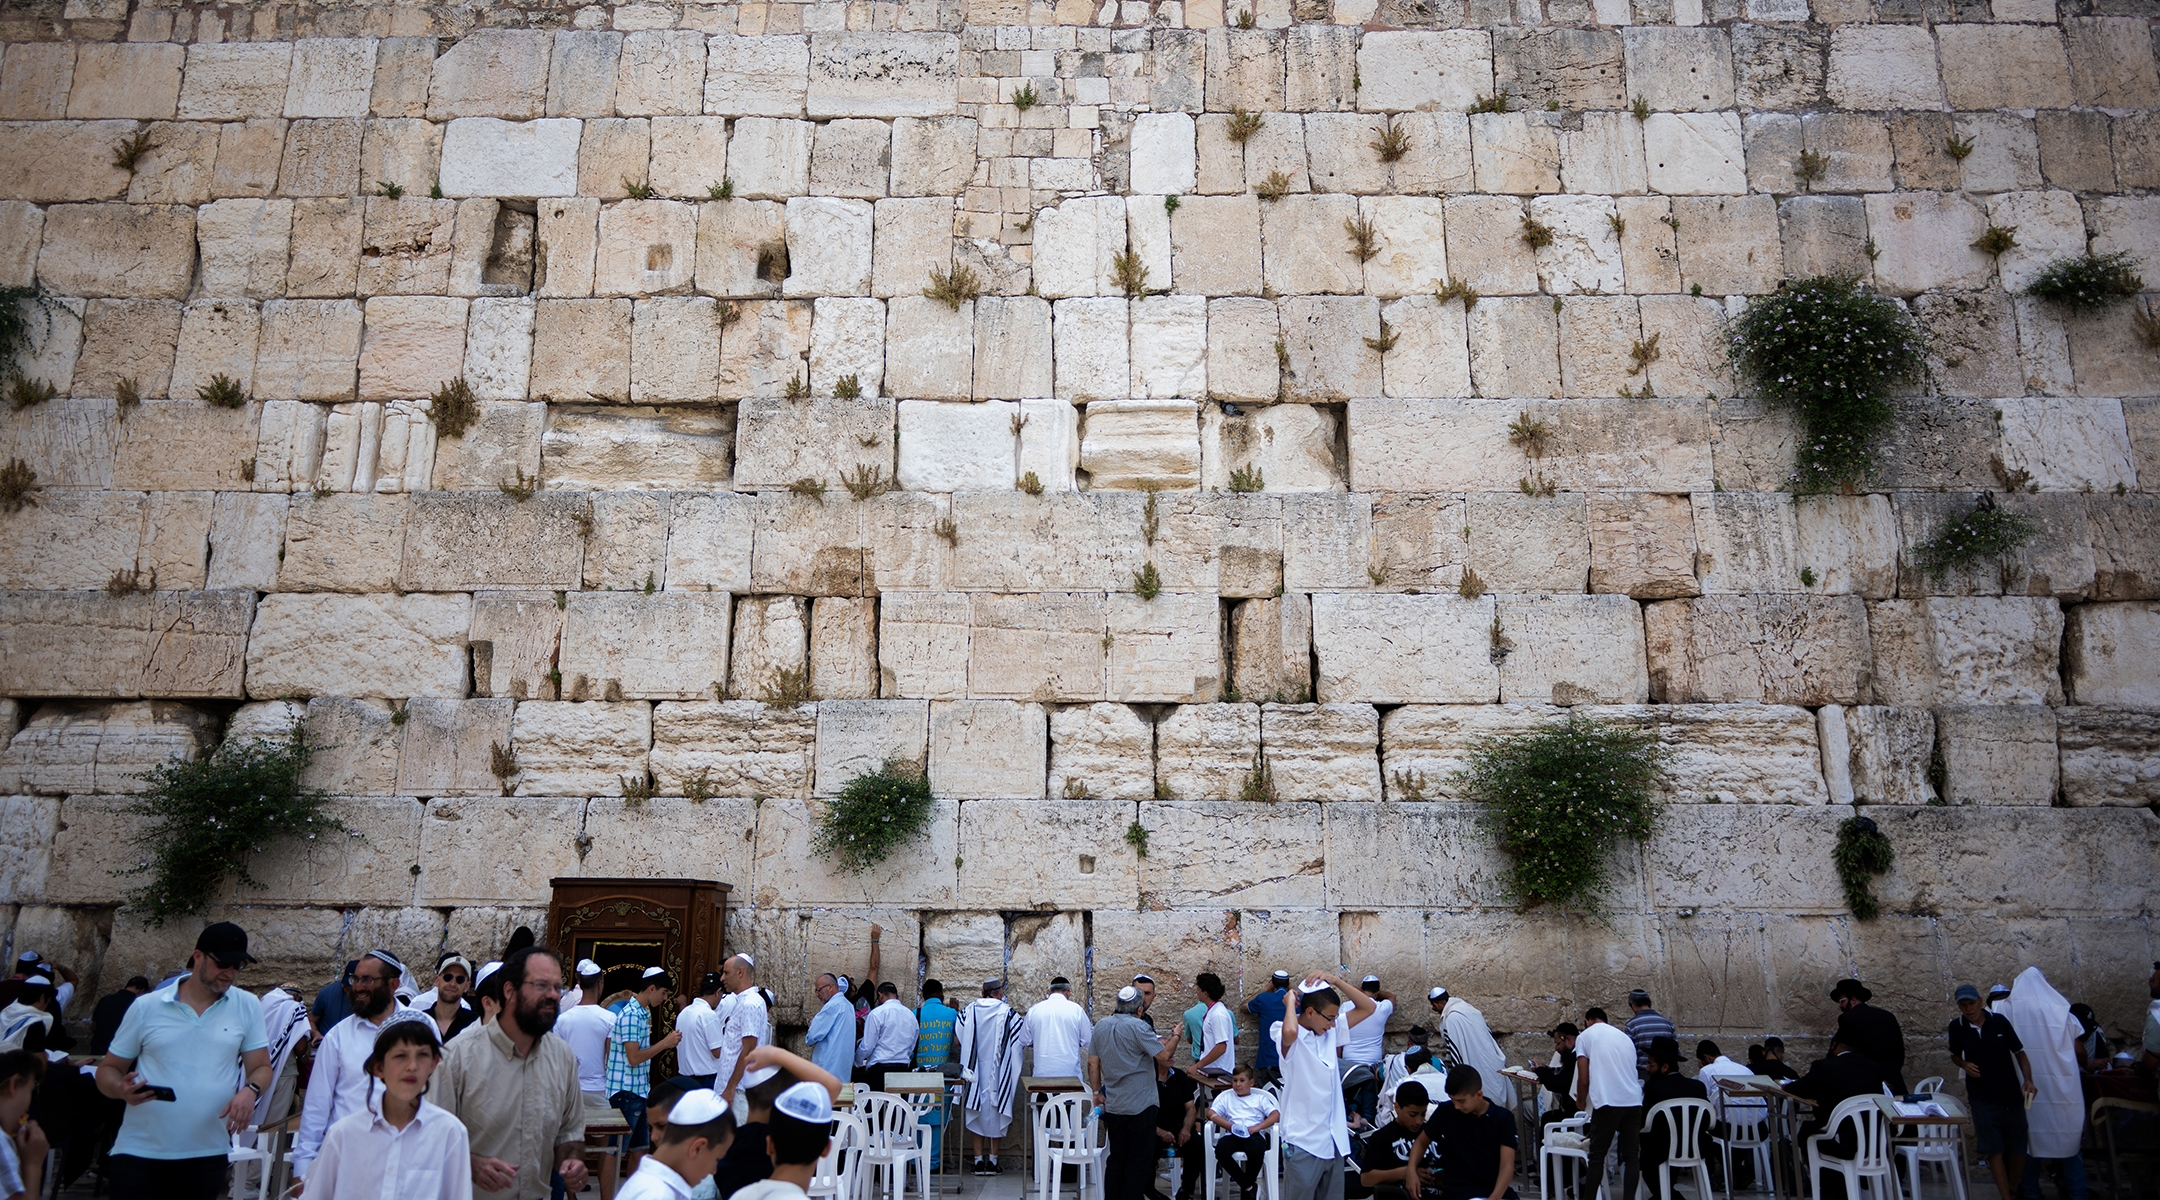 Brooklyn Orthodox family among those shot in attack near Western Wall